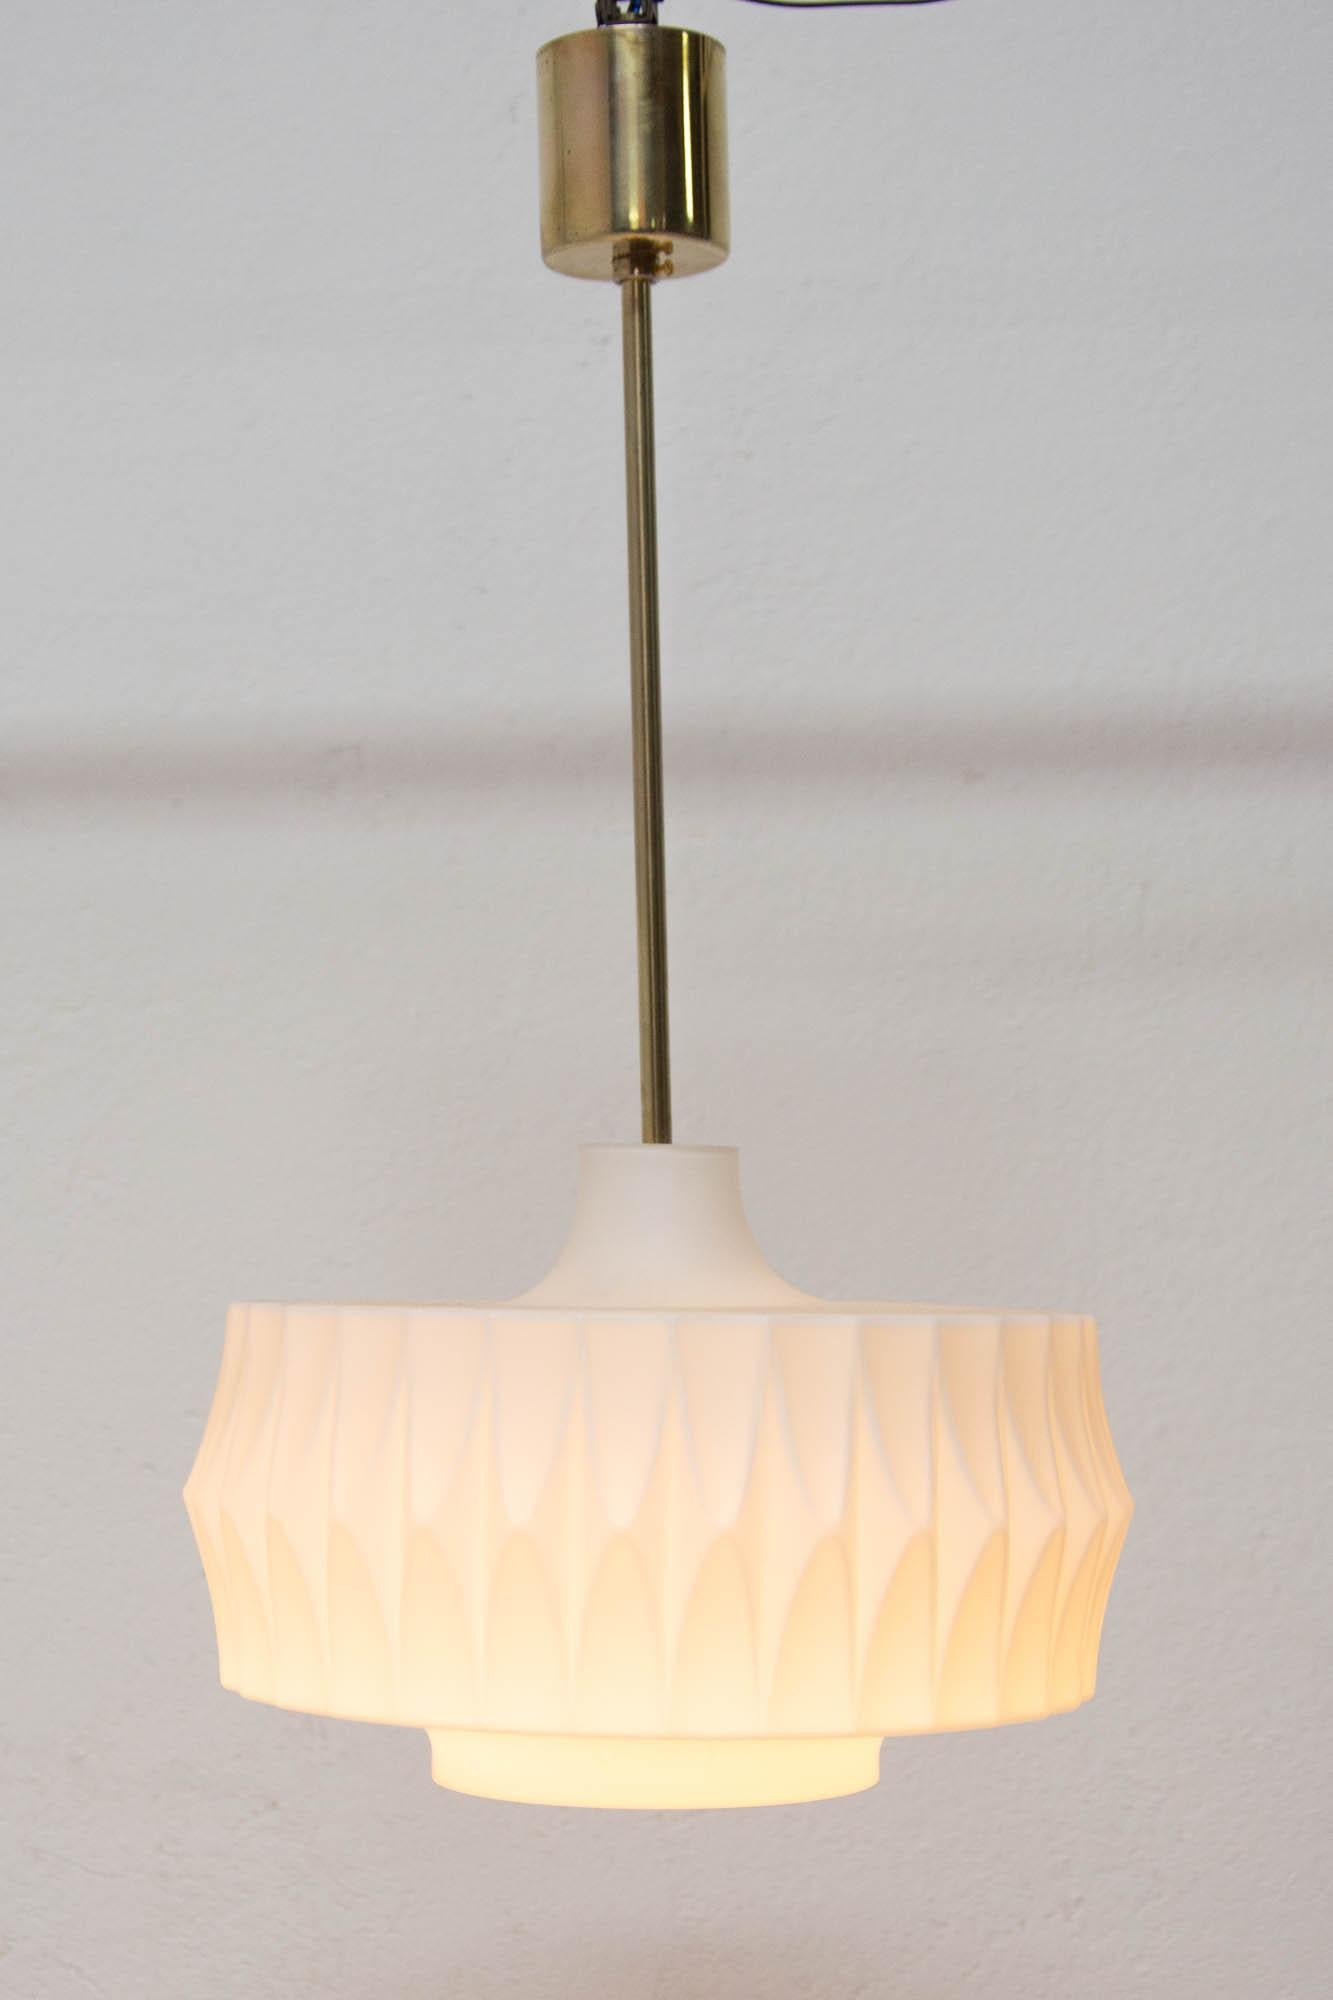 Modernist pendant chandelier made of white opal glass with a brass rod. Made in the former Czechoslovakia in the 1970s. Suitable for entrance hall, living rooms or office.
In very good Vintage condition. Newly wired.

Lampshade height: 19 cm.